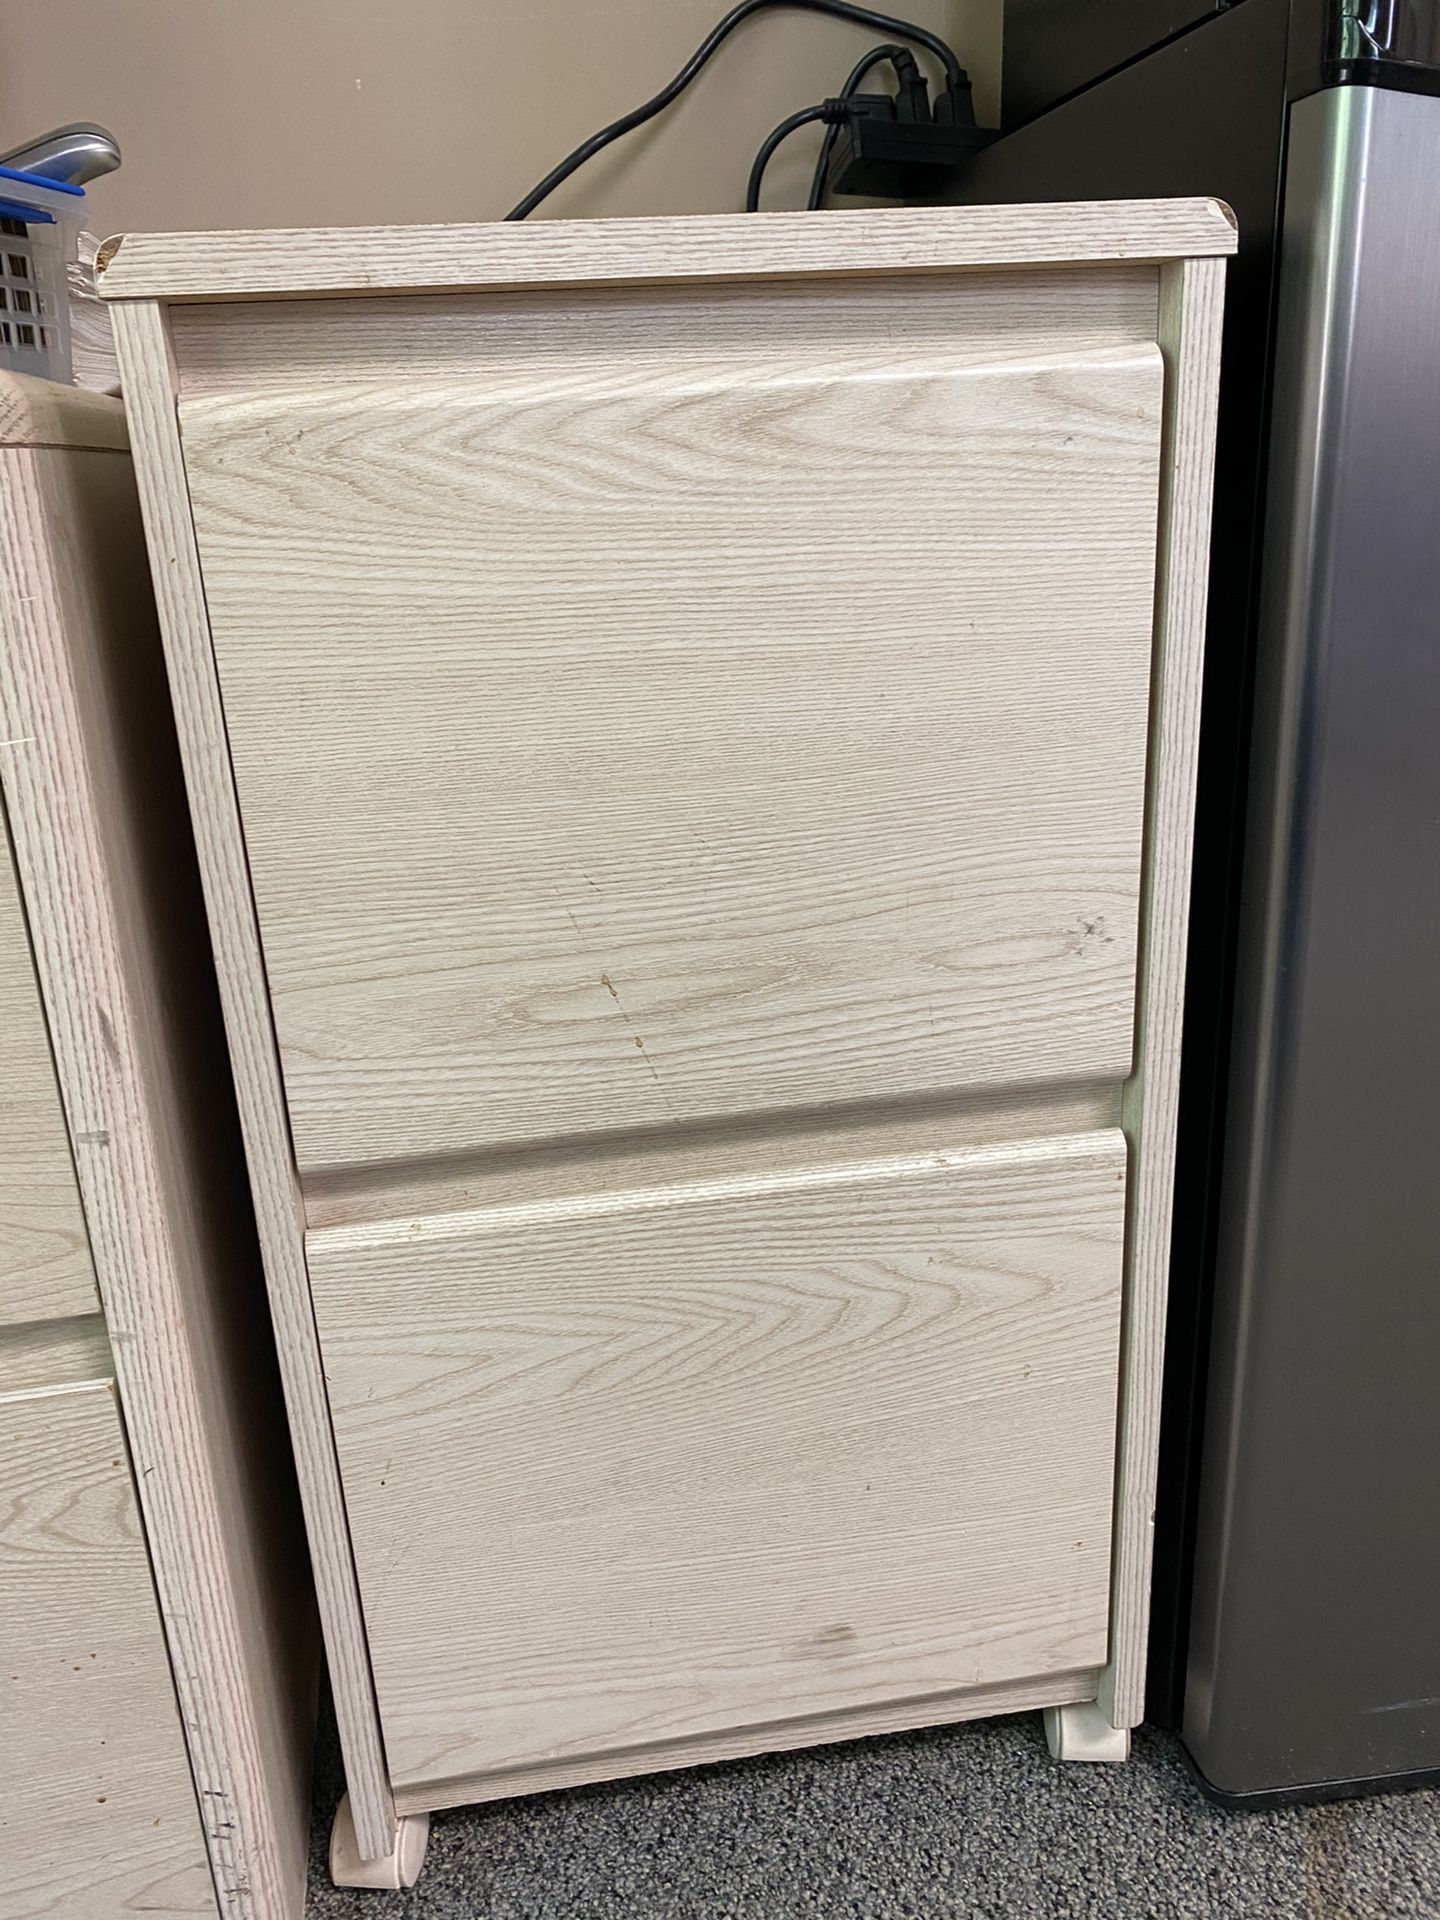 Small filing cabinet